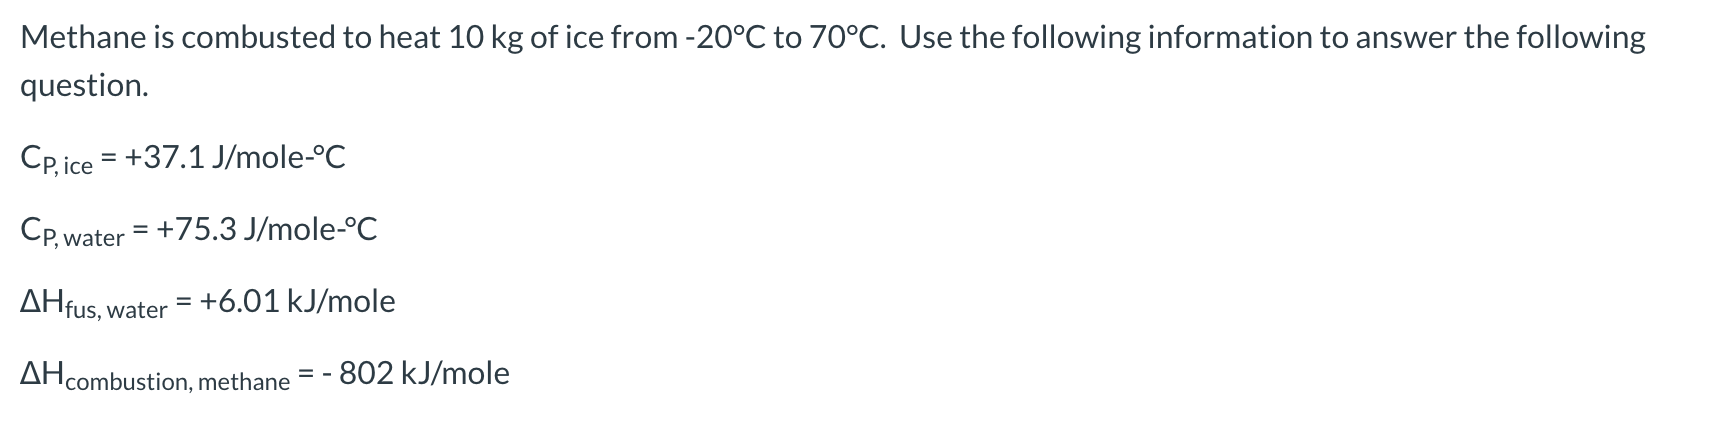 Methane is combusted to heat 10 kg of ice from -20°C to 70°C. Use the following information to answer the following
question.
CP,ice +37.1 J/mole-°C
Cp,water 75.3 J/mole-°C
AHfus, water
= +6.01 kJ/mole
AHcombustion, methane
802 kJ/mole
